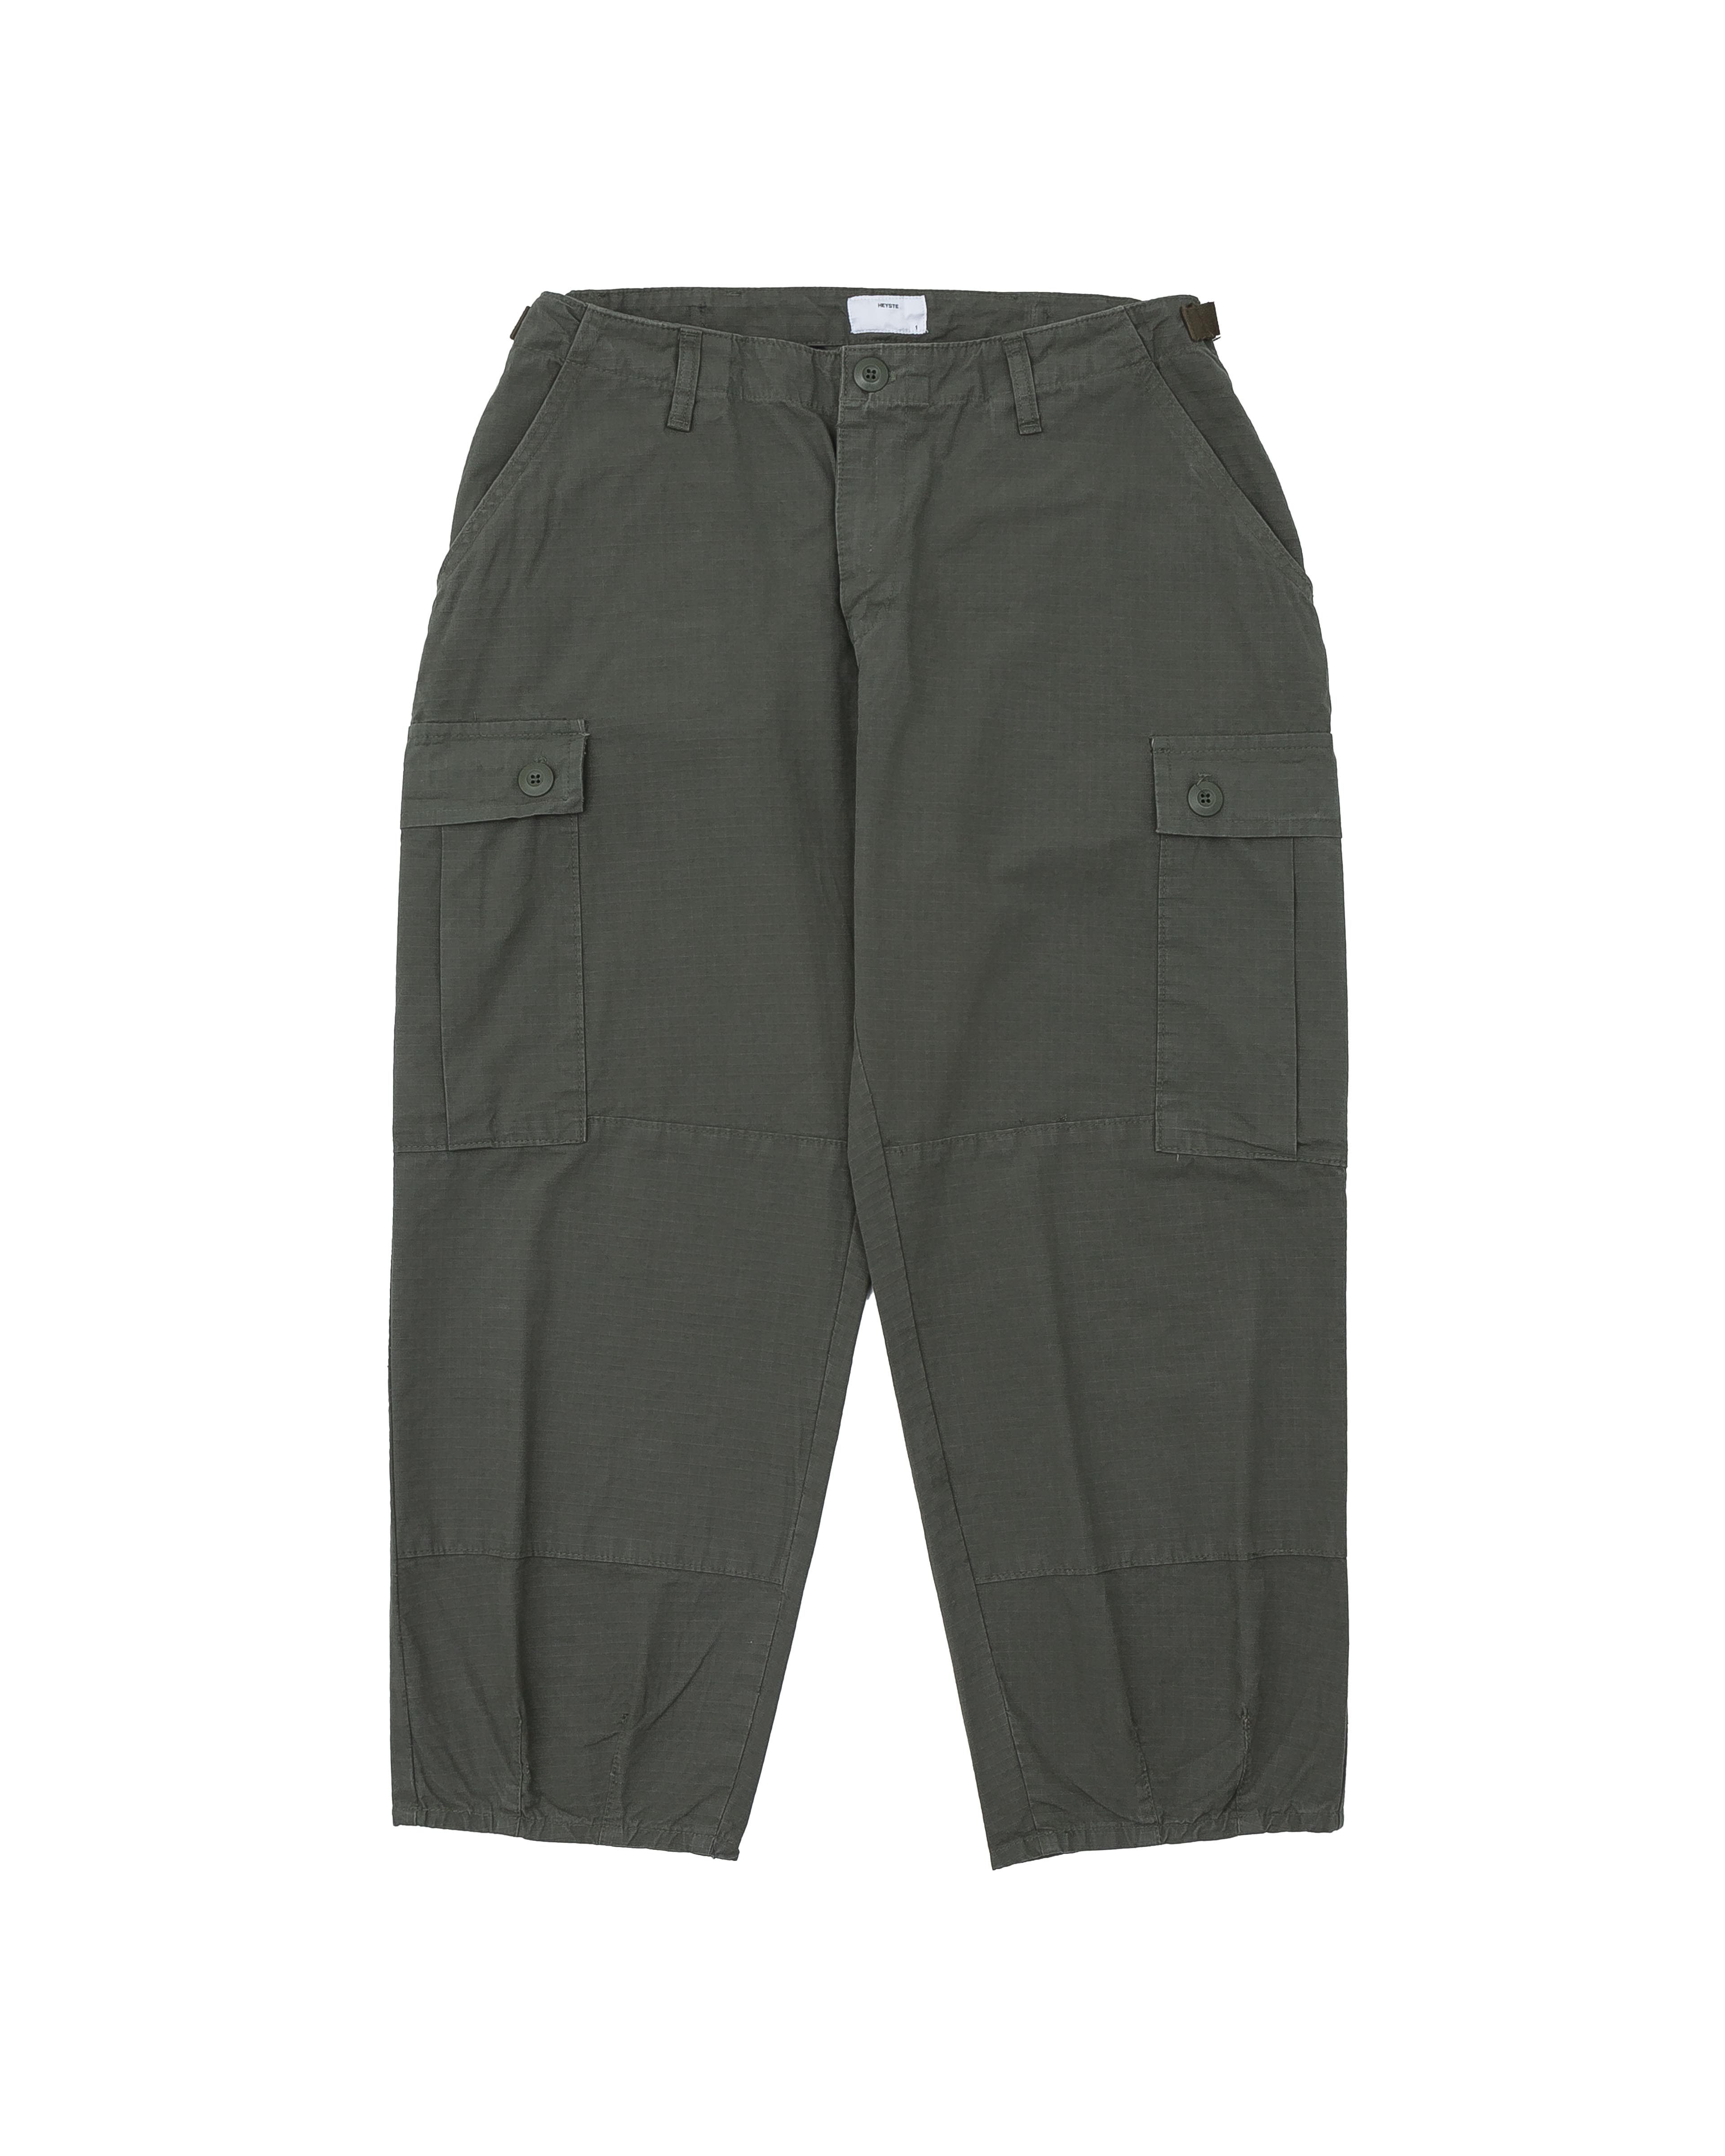 Ripstop Cargo Pants / olive